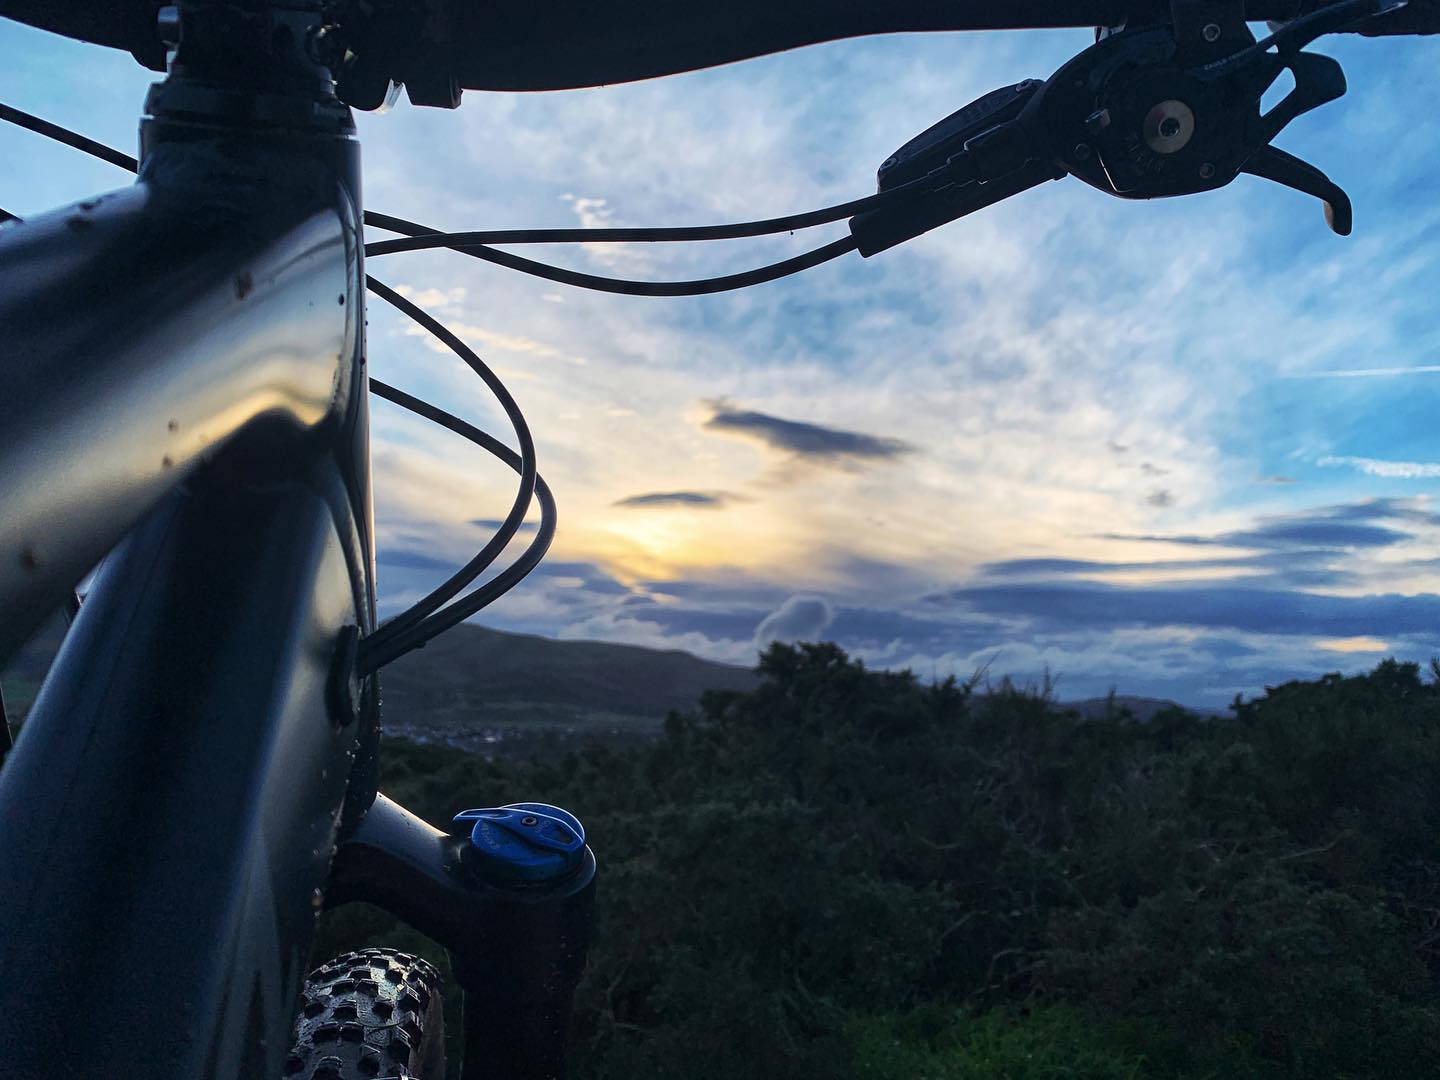 Winter sunset over the Pentlands from Braid Hill with MTB, Edinburgh